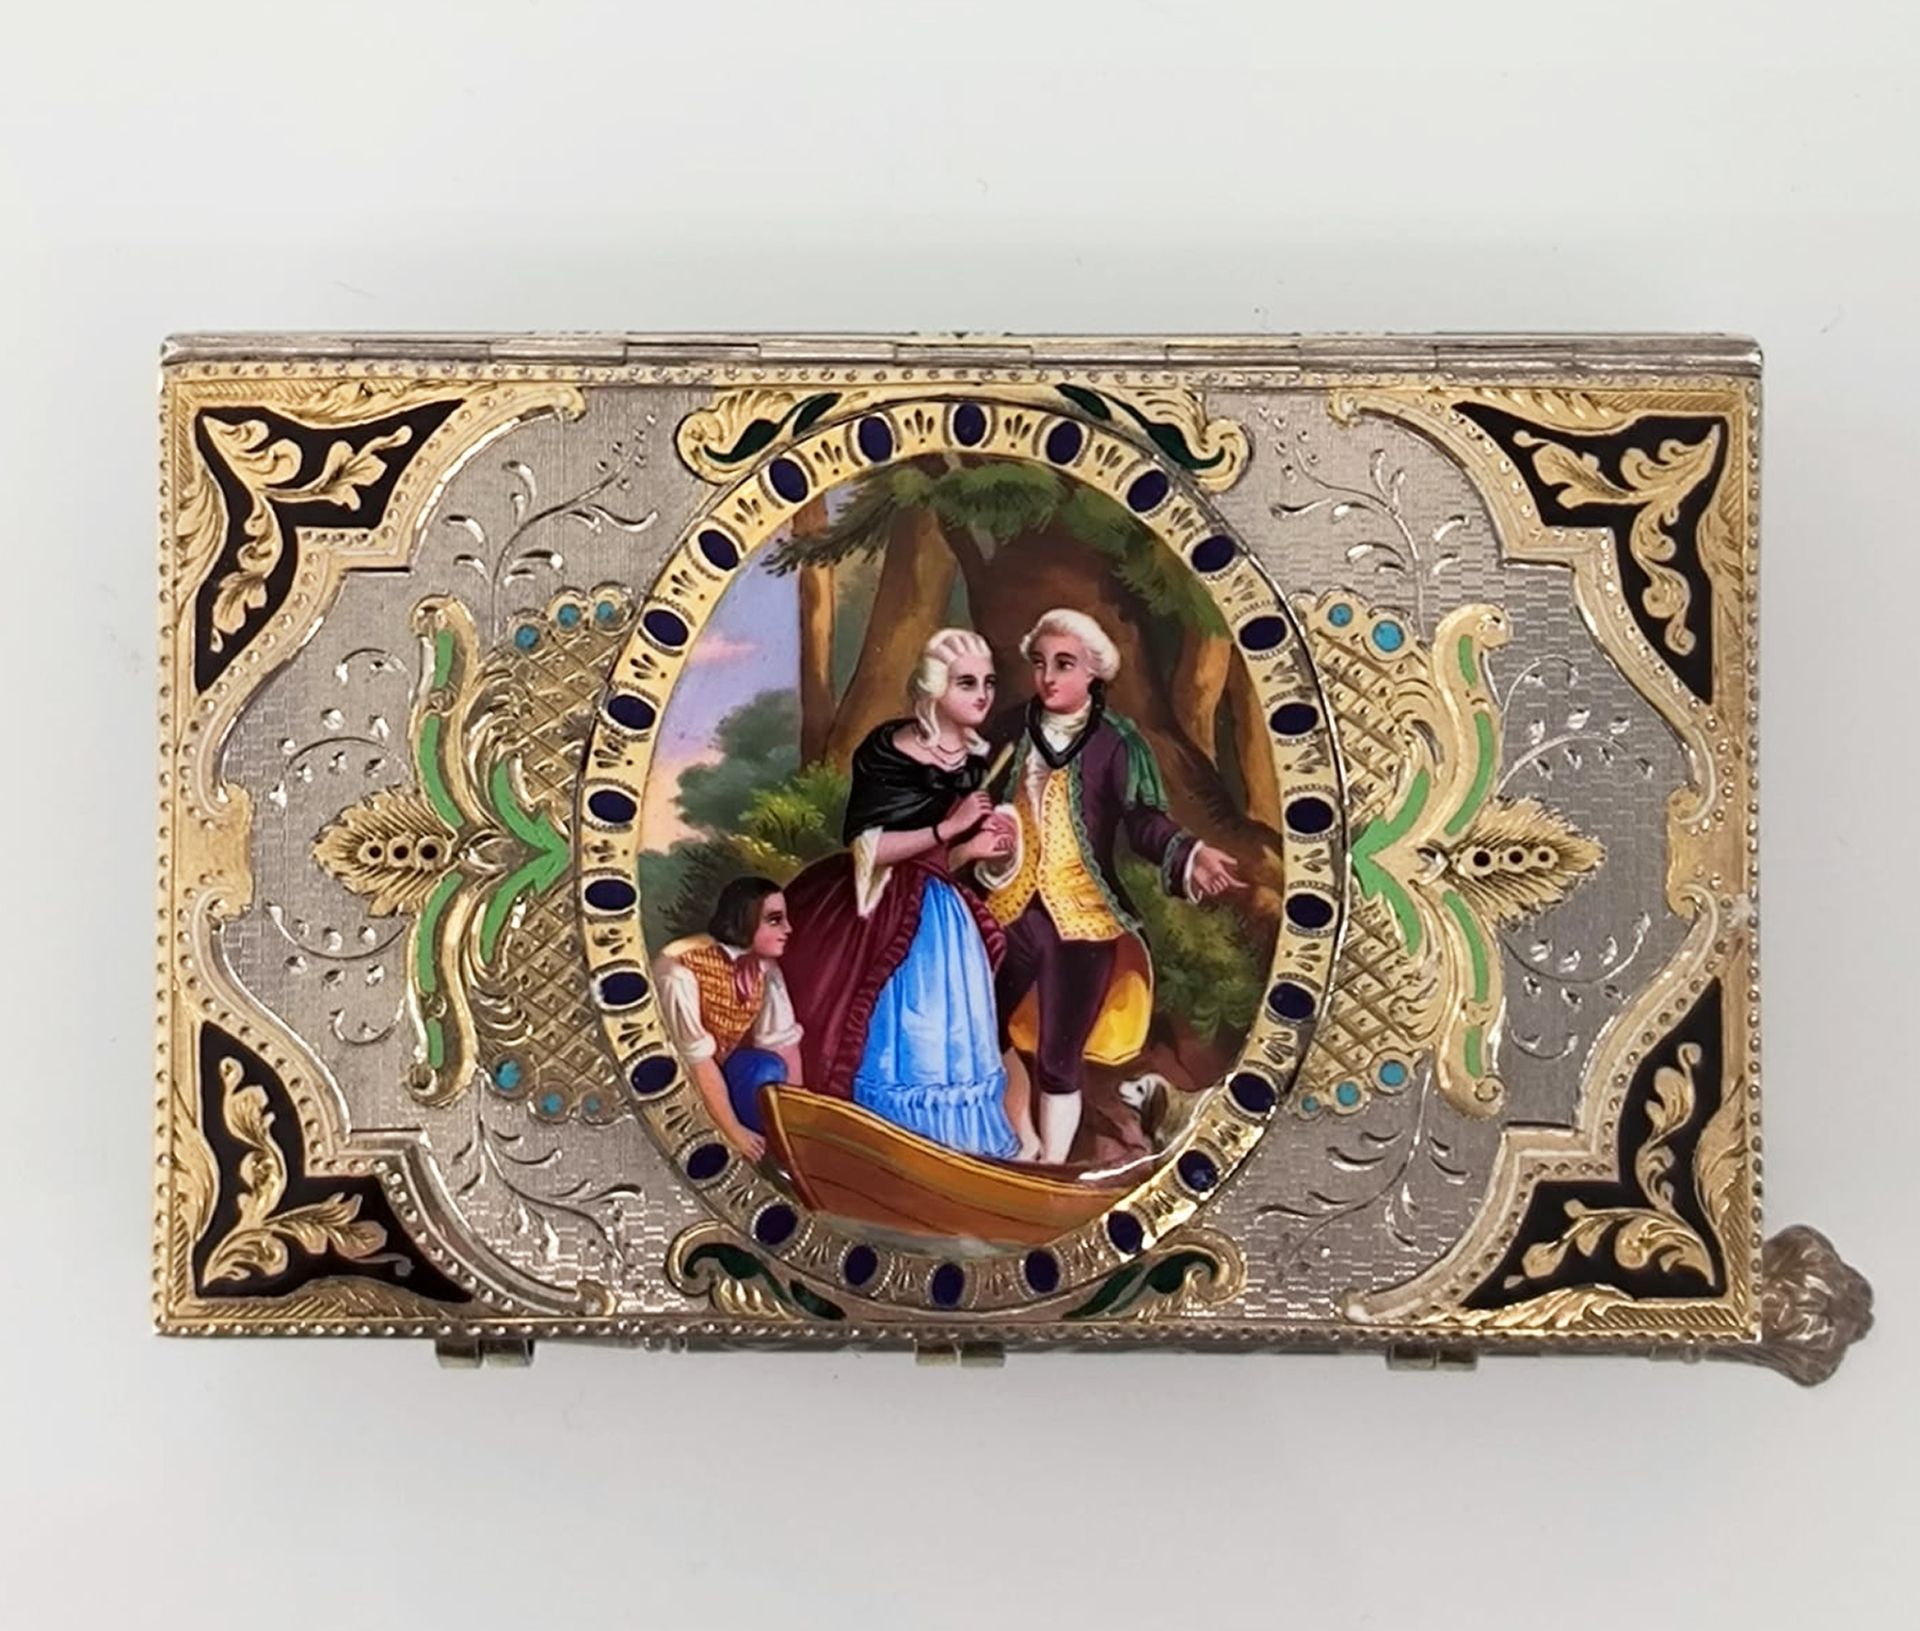 Etui Voyage in silver with a double-sided gallant scene and gold guilloché enamel, 19th century